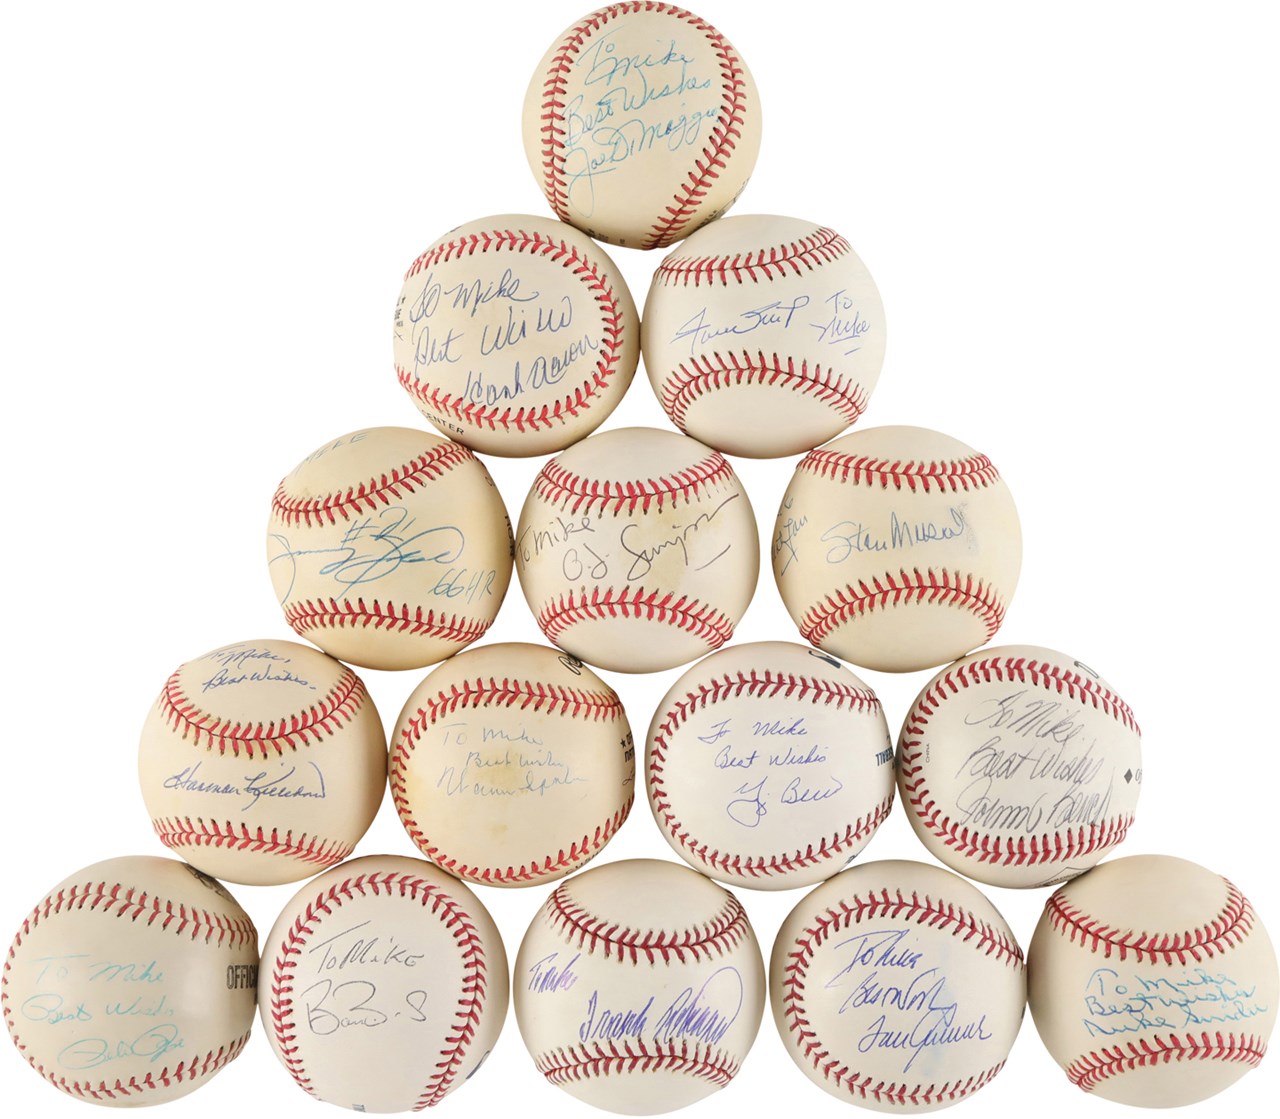 - Signed Baseballs Personalized to Mike (30)